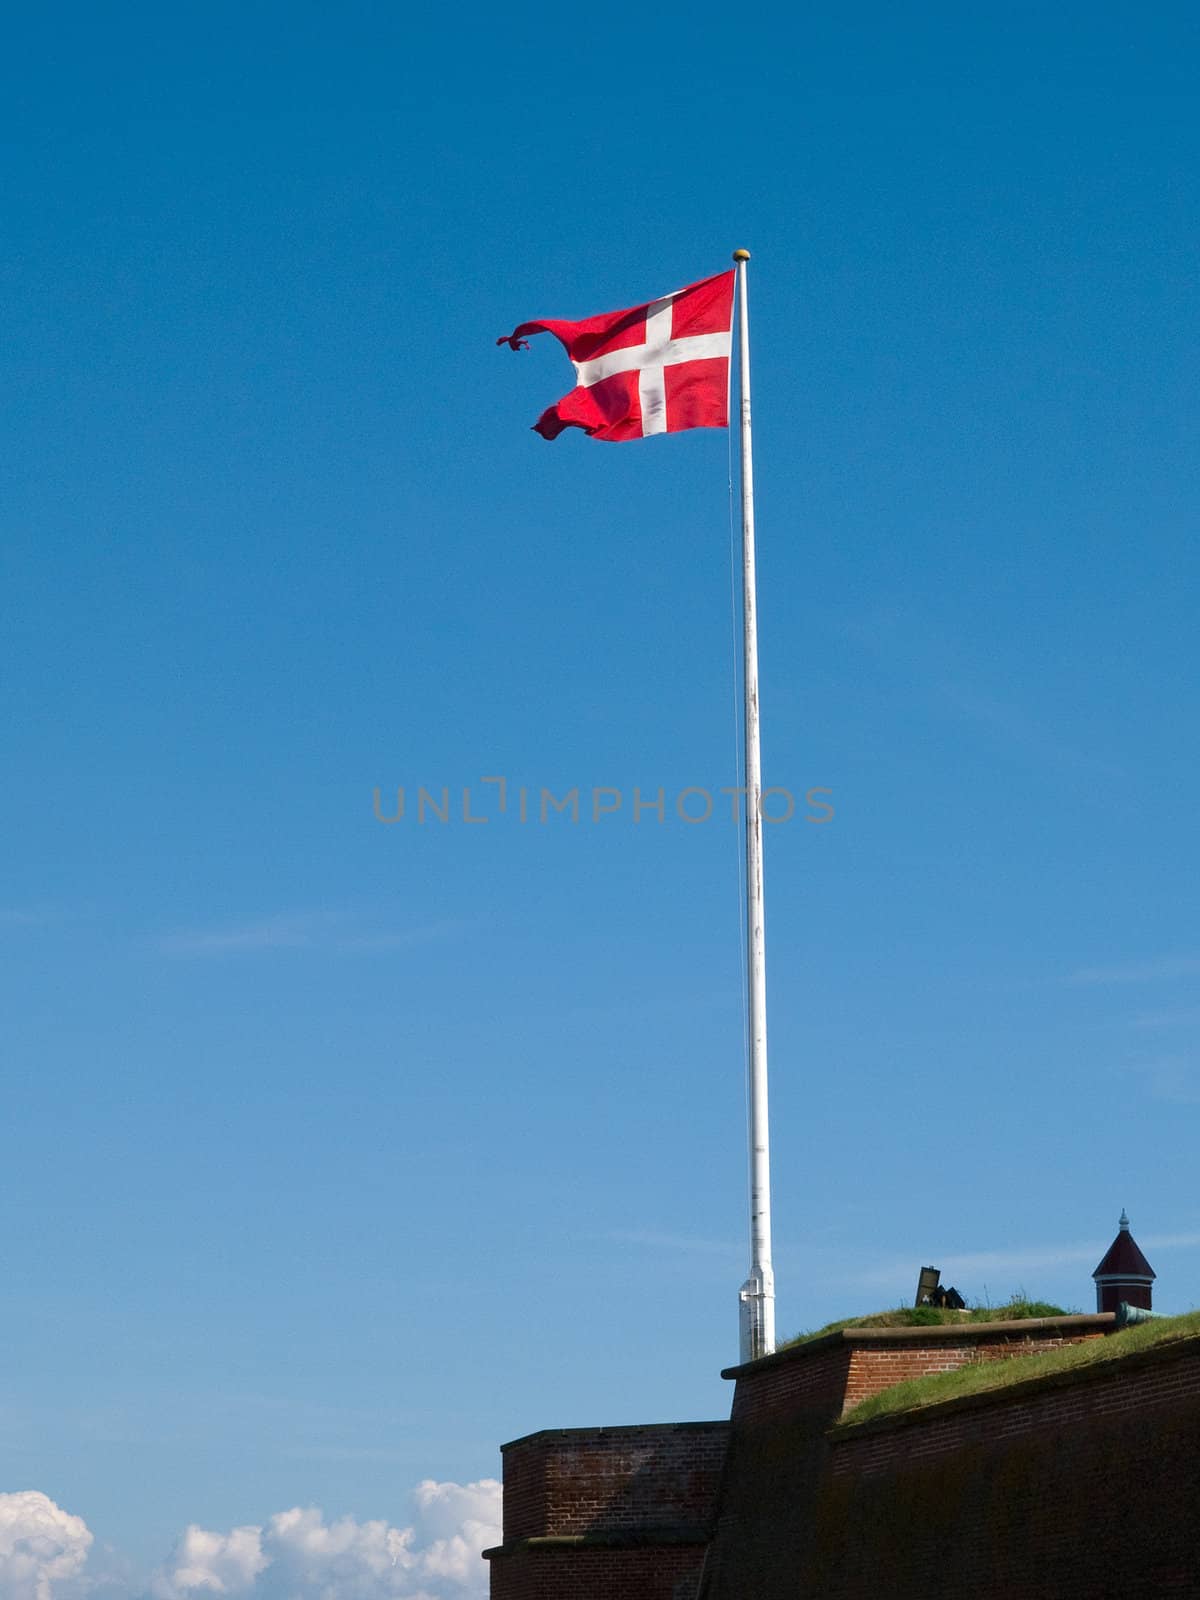 Flag of Denmark up high in the air with blue sky background